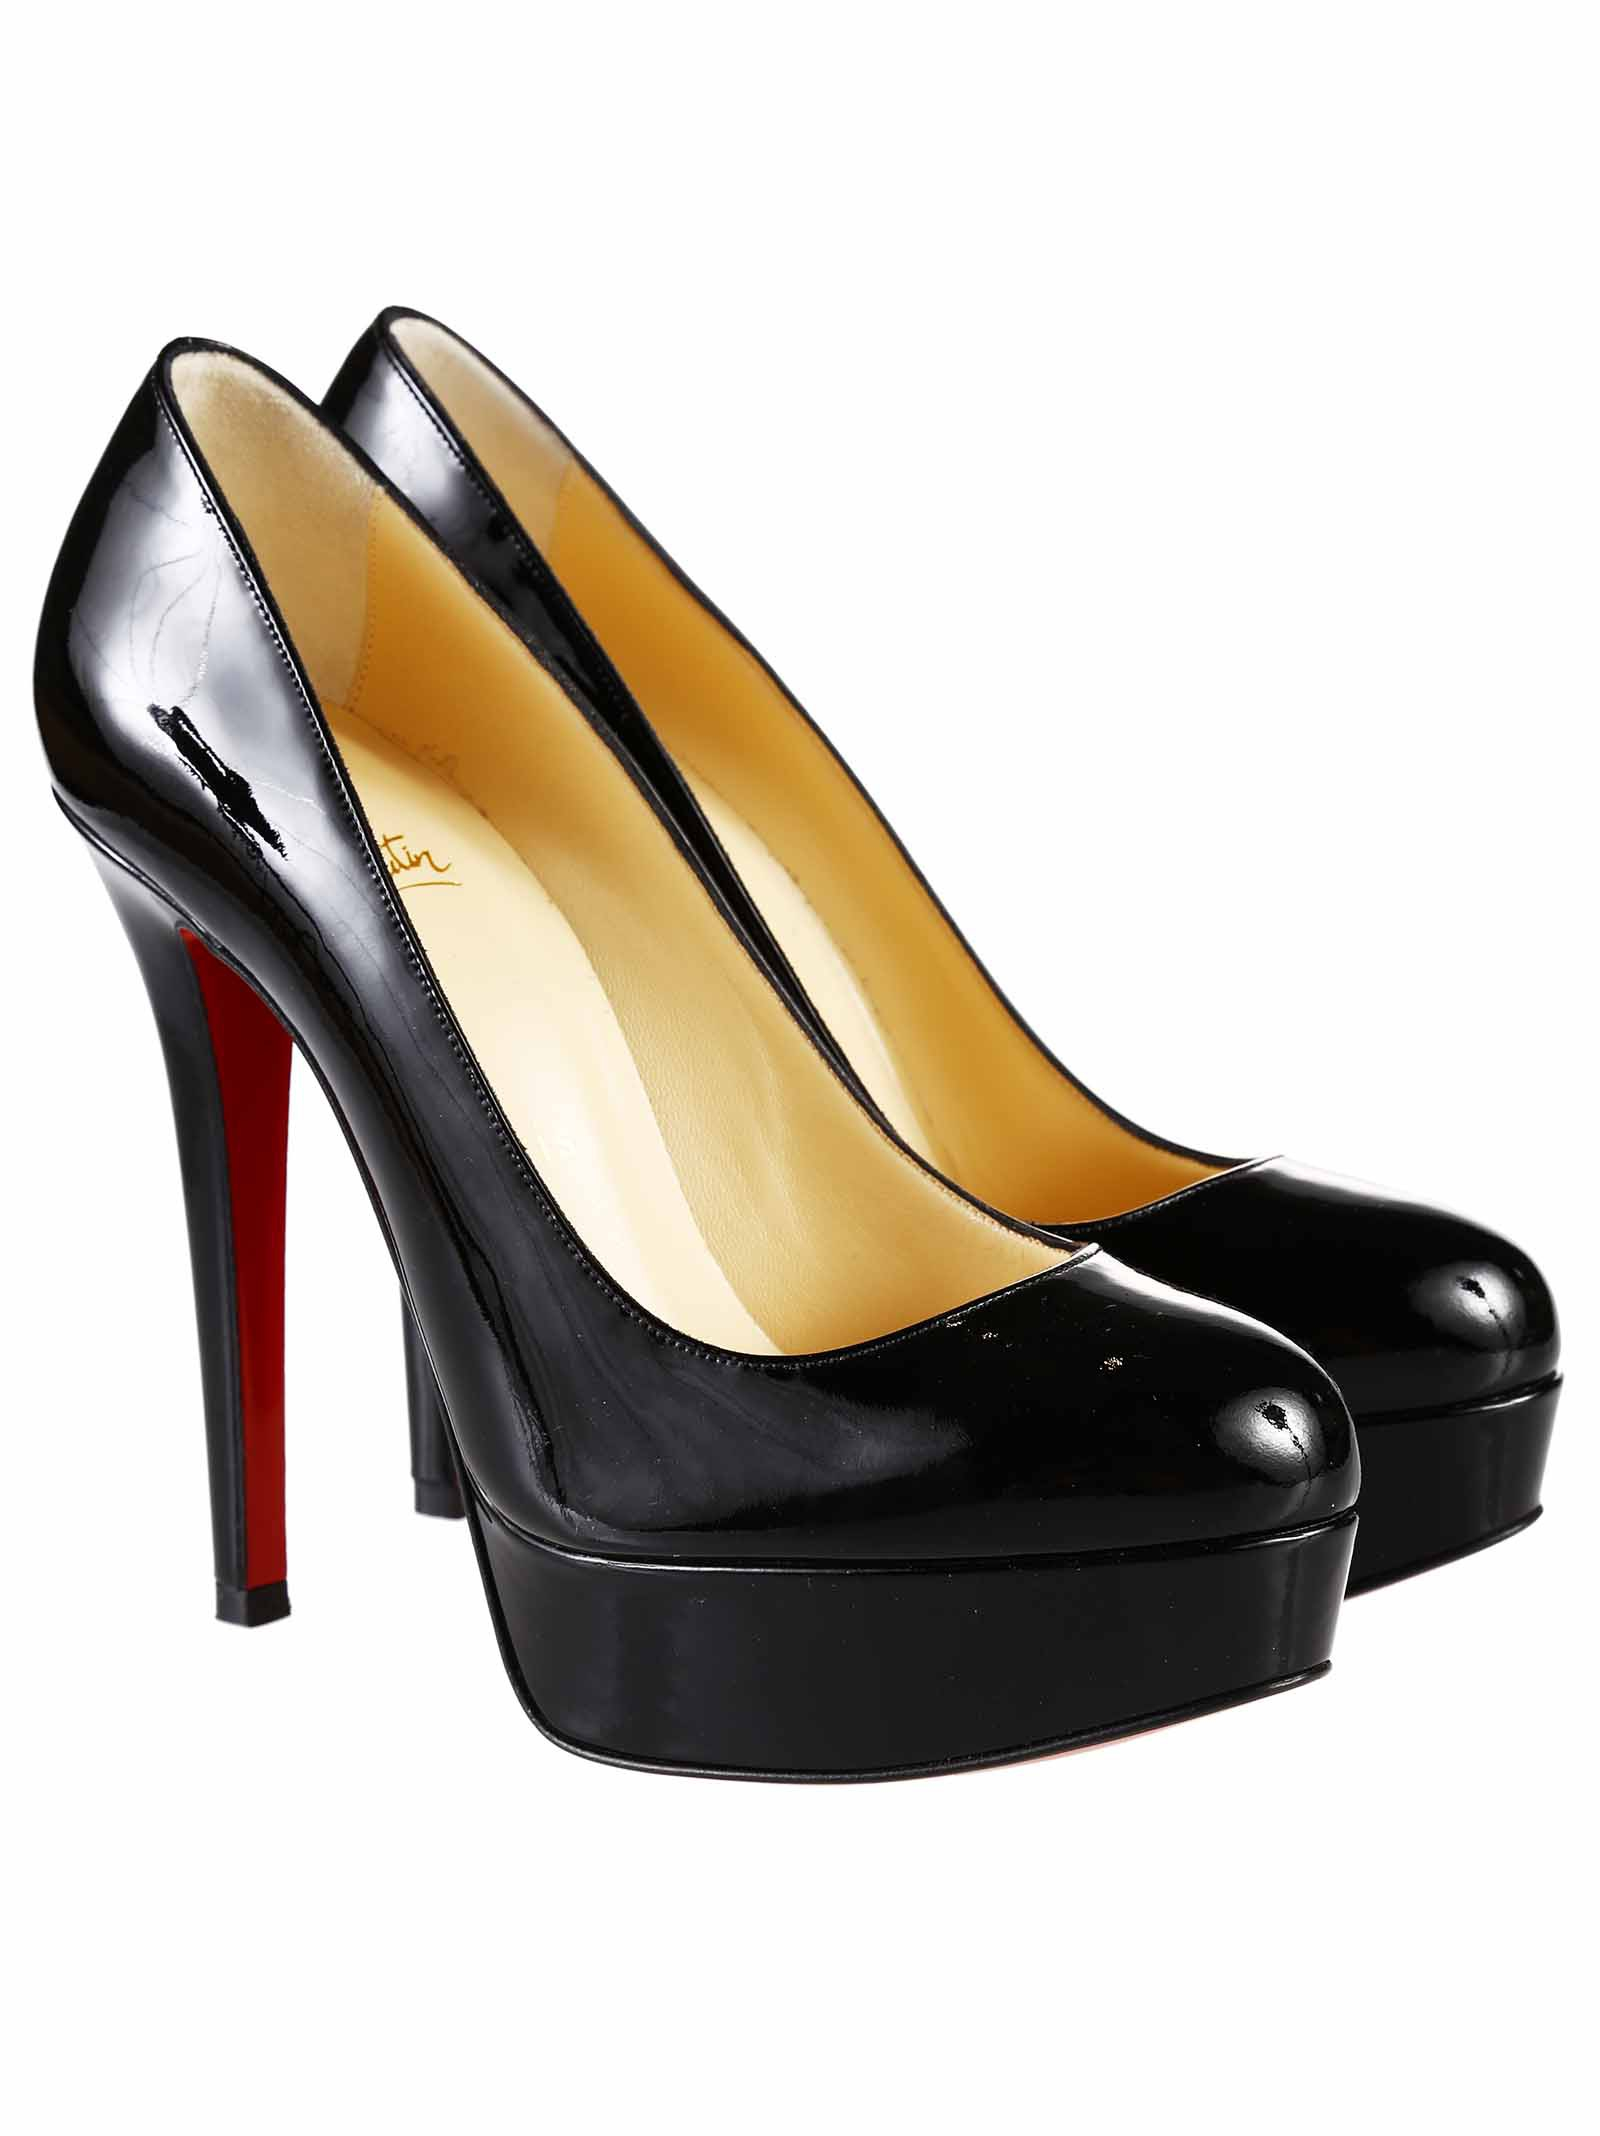 Christian louboutin Bianca 140 Patent Pumps in Black | Lyst  